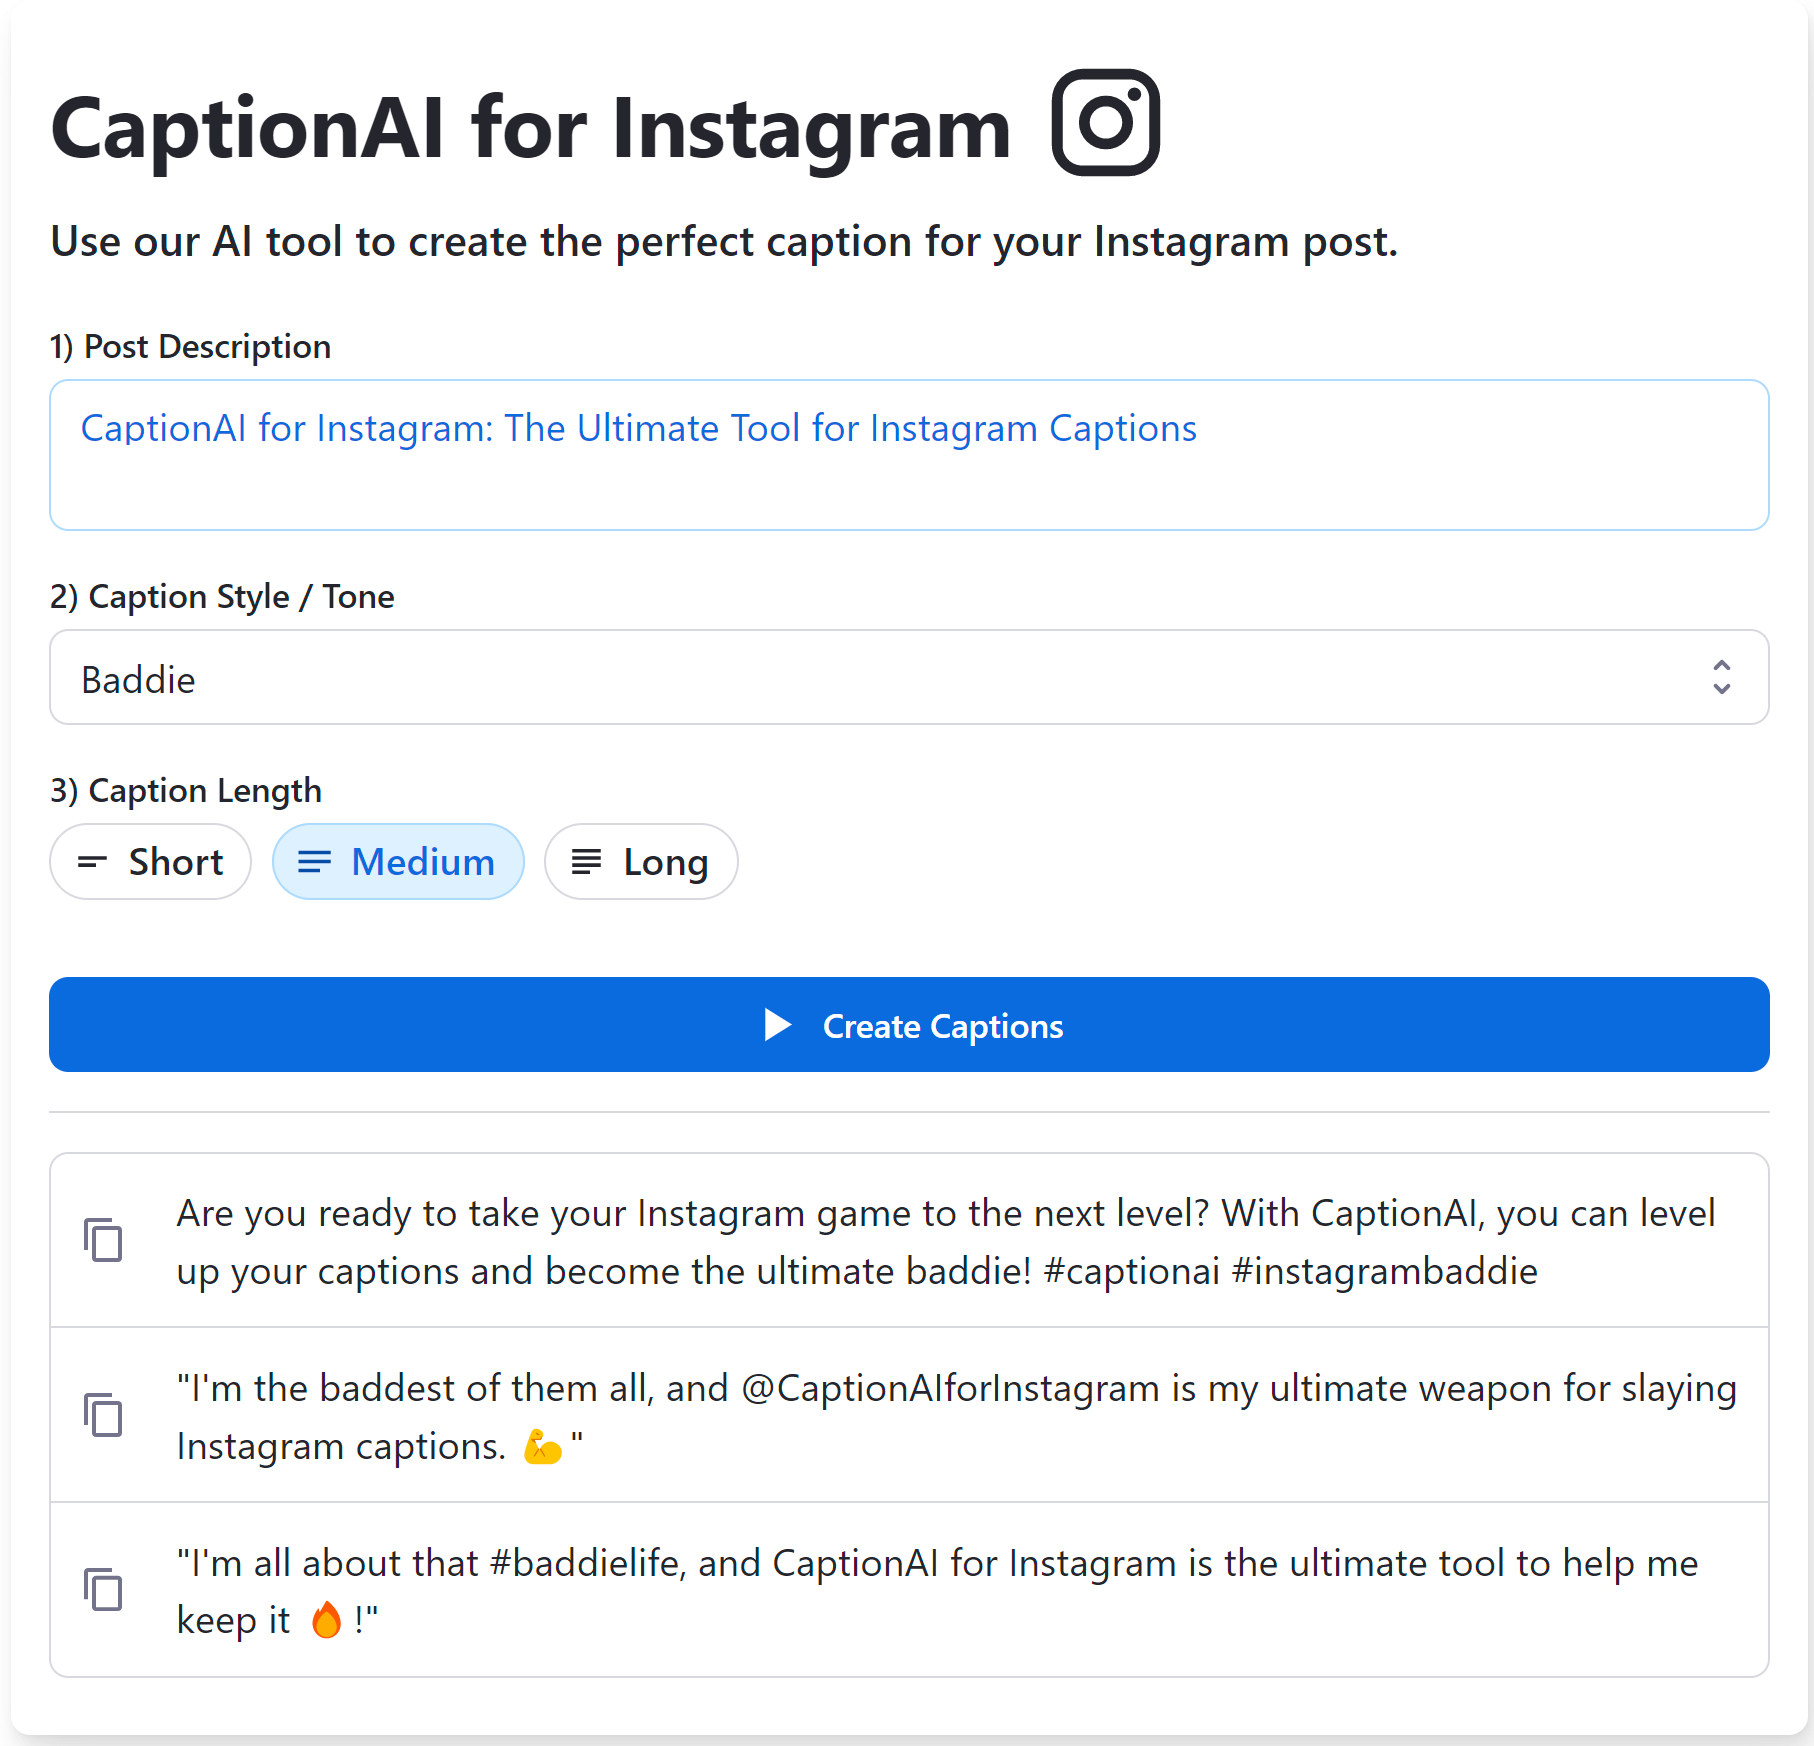 Get the Perfect Caption with CaptionAI for Instagram